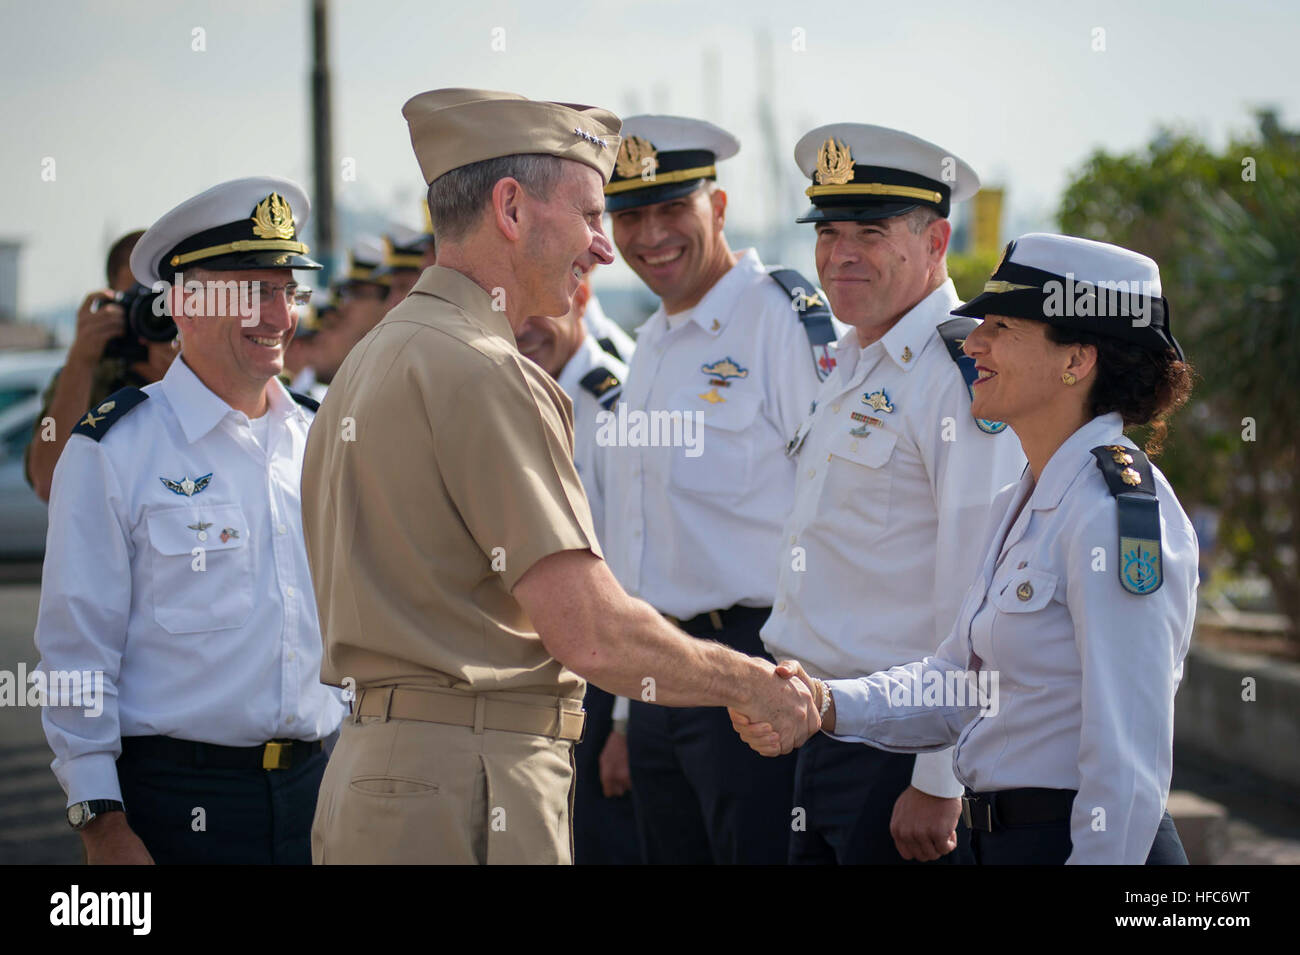 131124-N-WL435-122 HAIFA, Israel (Nov. 24, 2013) Chief of Naval Operations (CNO) Adm. Jonathan Greenert meets with Israel navy officers during a troop inspection with the Commander in Chief of the Israel Navy Vice Adm. Ram Rutberg during a full honors ceremony to welcome him upon his arrival at Haifa Naval Base. During the visit, Greenert observed several capabilities demonstrations conducted by the IN and conducted engagement meetings with Israel Defense Force leadership. (U.S. Navy photo by Chief Mass Communication Specialist Peter D. Lawlor/Released) Jonathan Greenert visit to Haifa (131124 Stock Photo